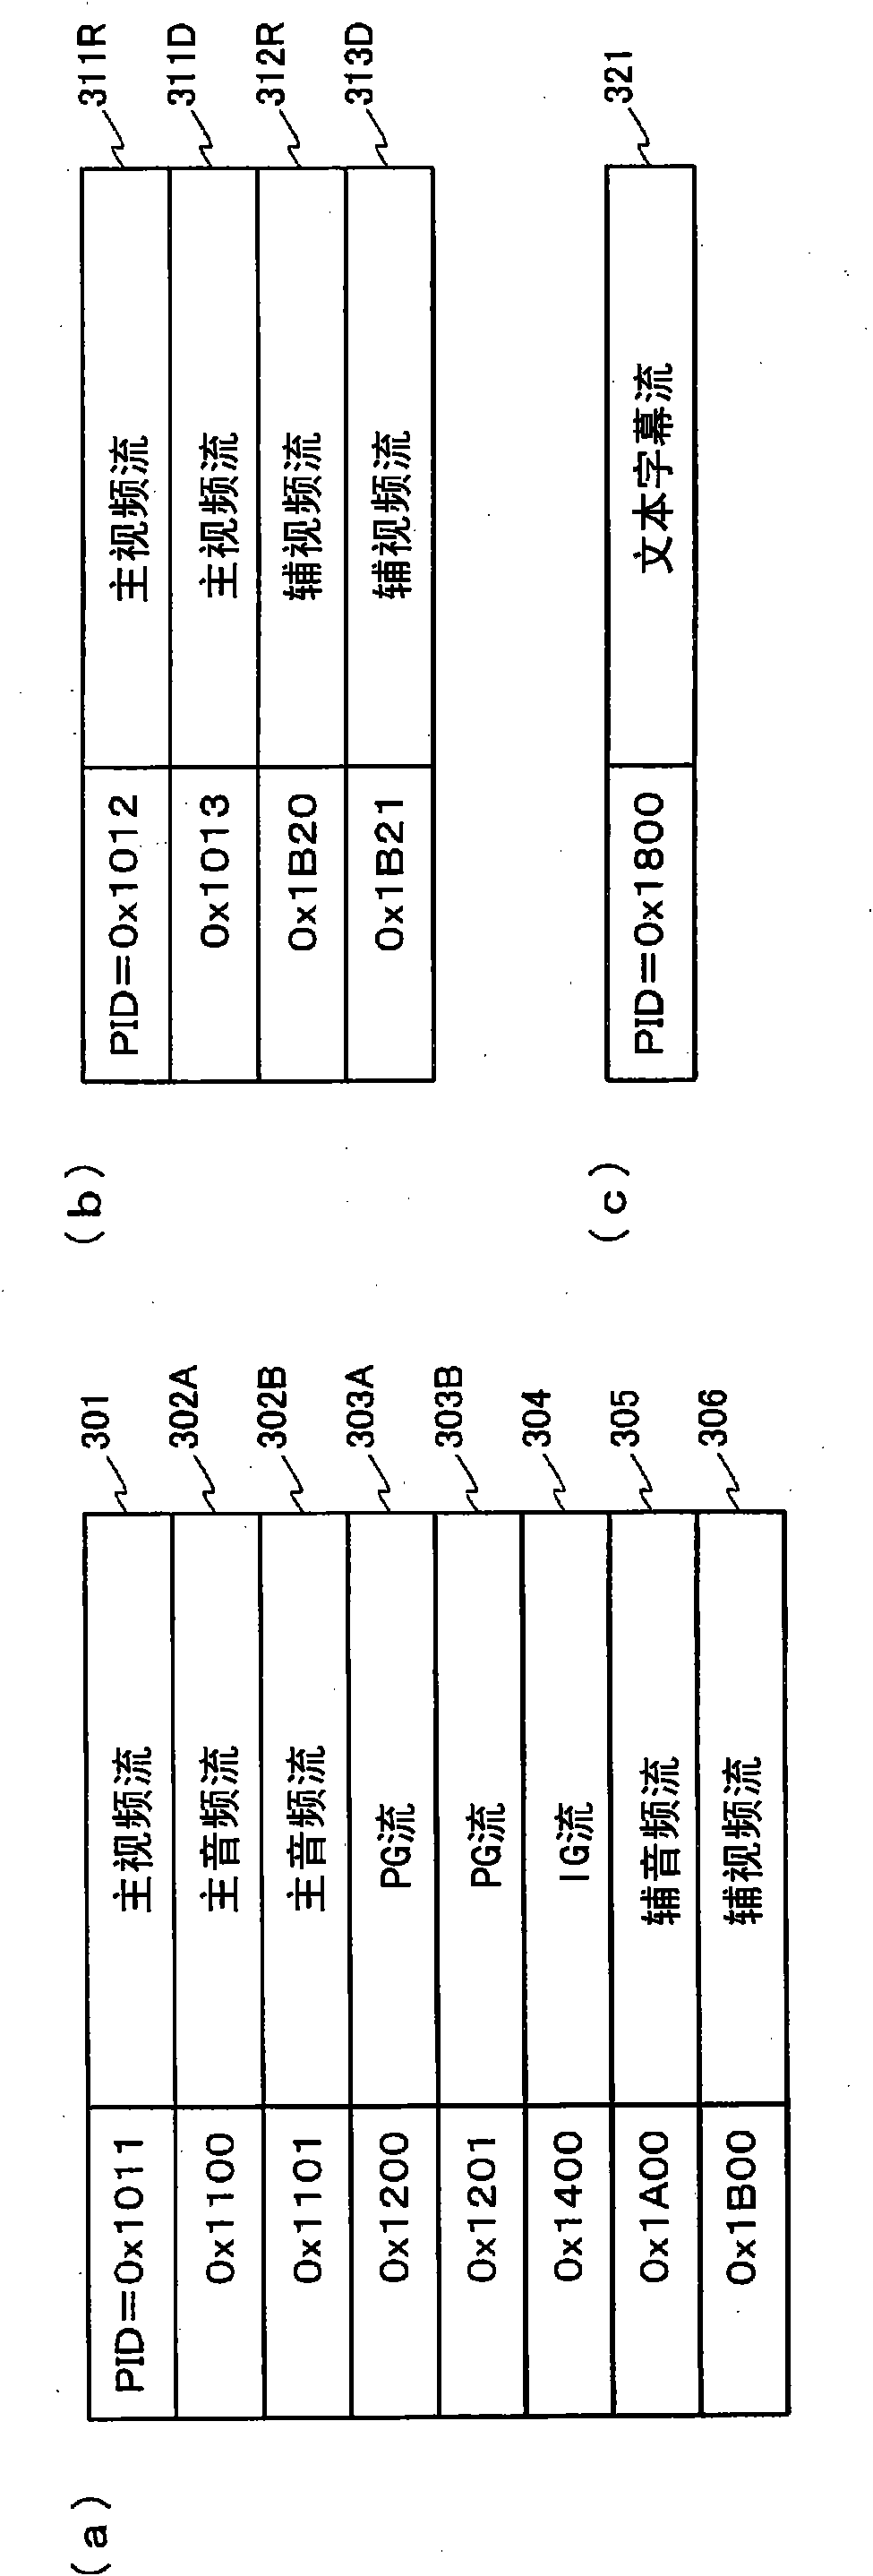 Recording medium, reproducing device, encoding device, integrated circuit, and reproduction output device